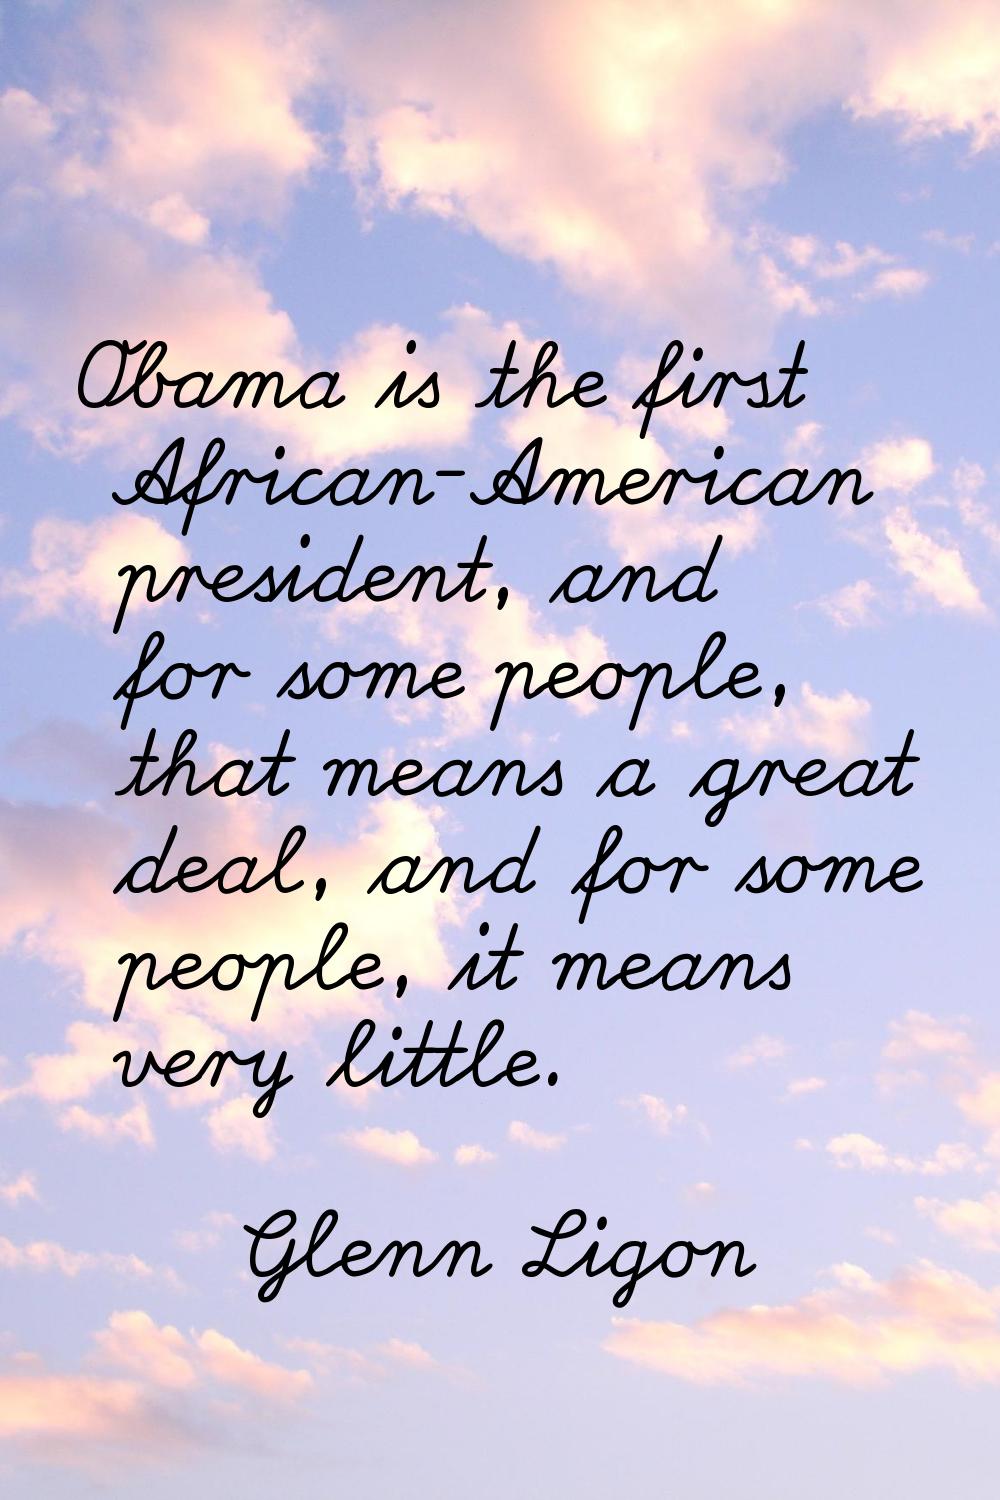 Obama is the first African-American president, and for some people, that means a great deal, and fo